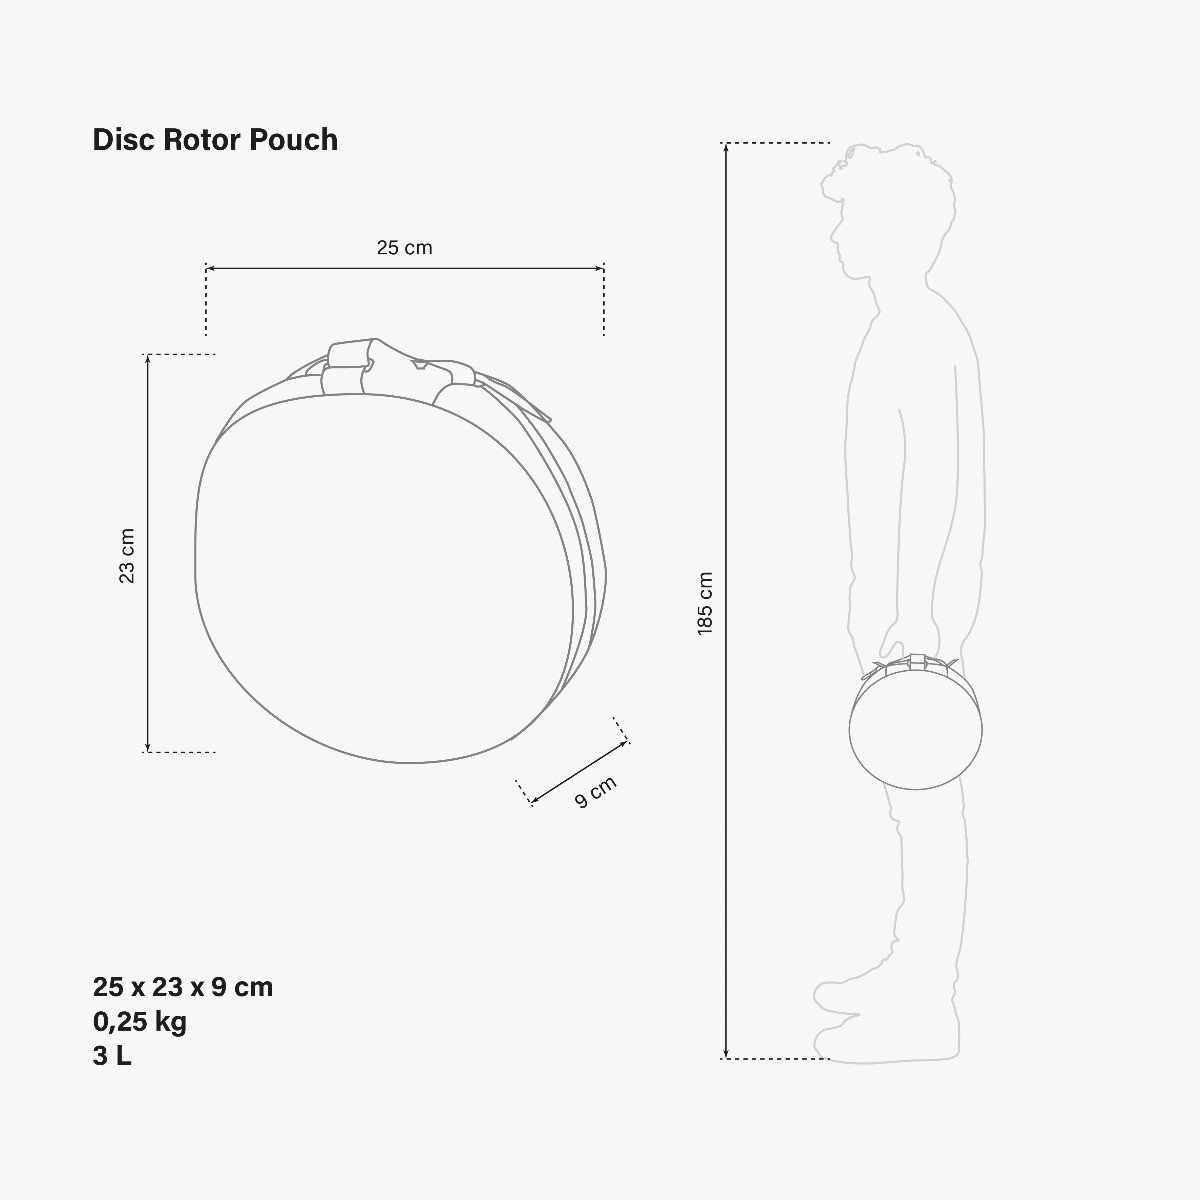 DISC ROTOR POUCH